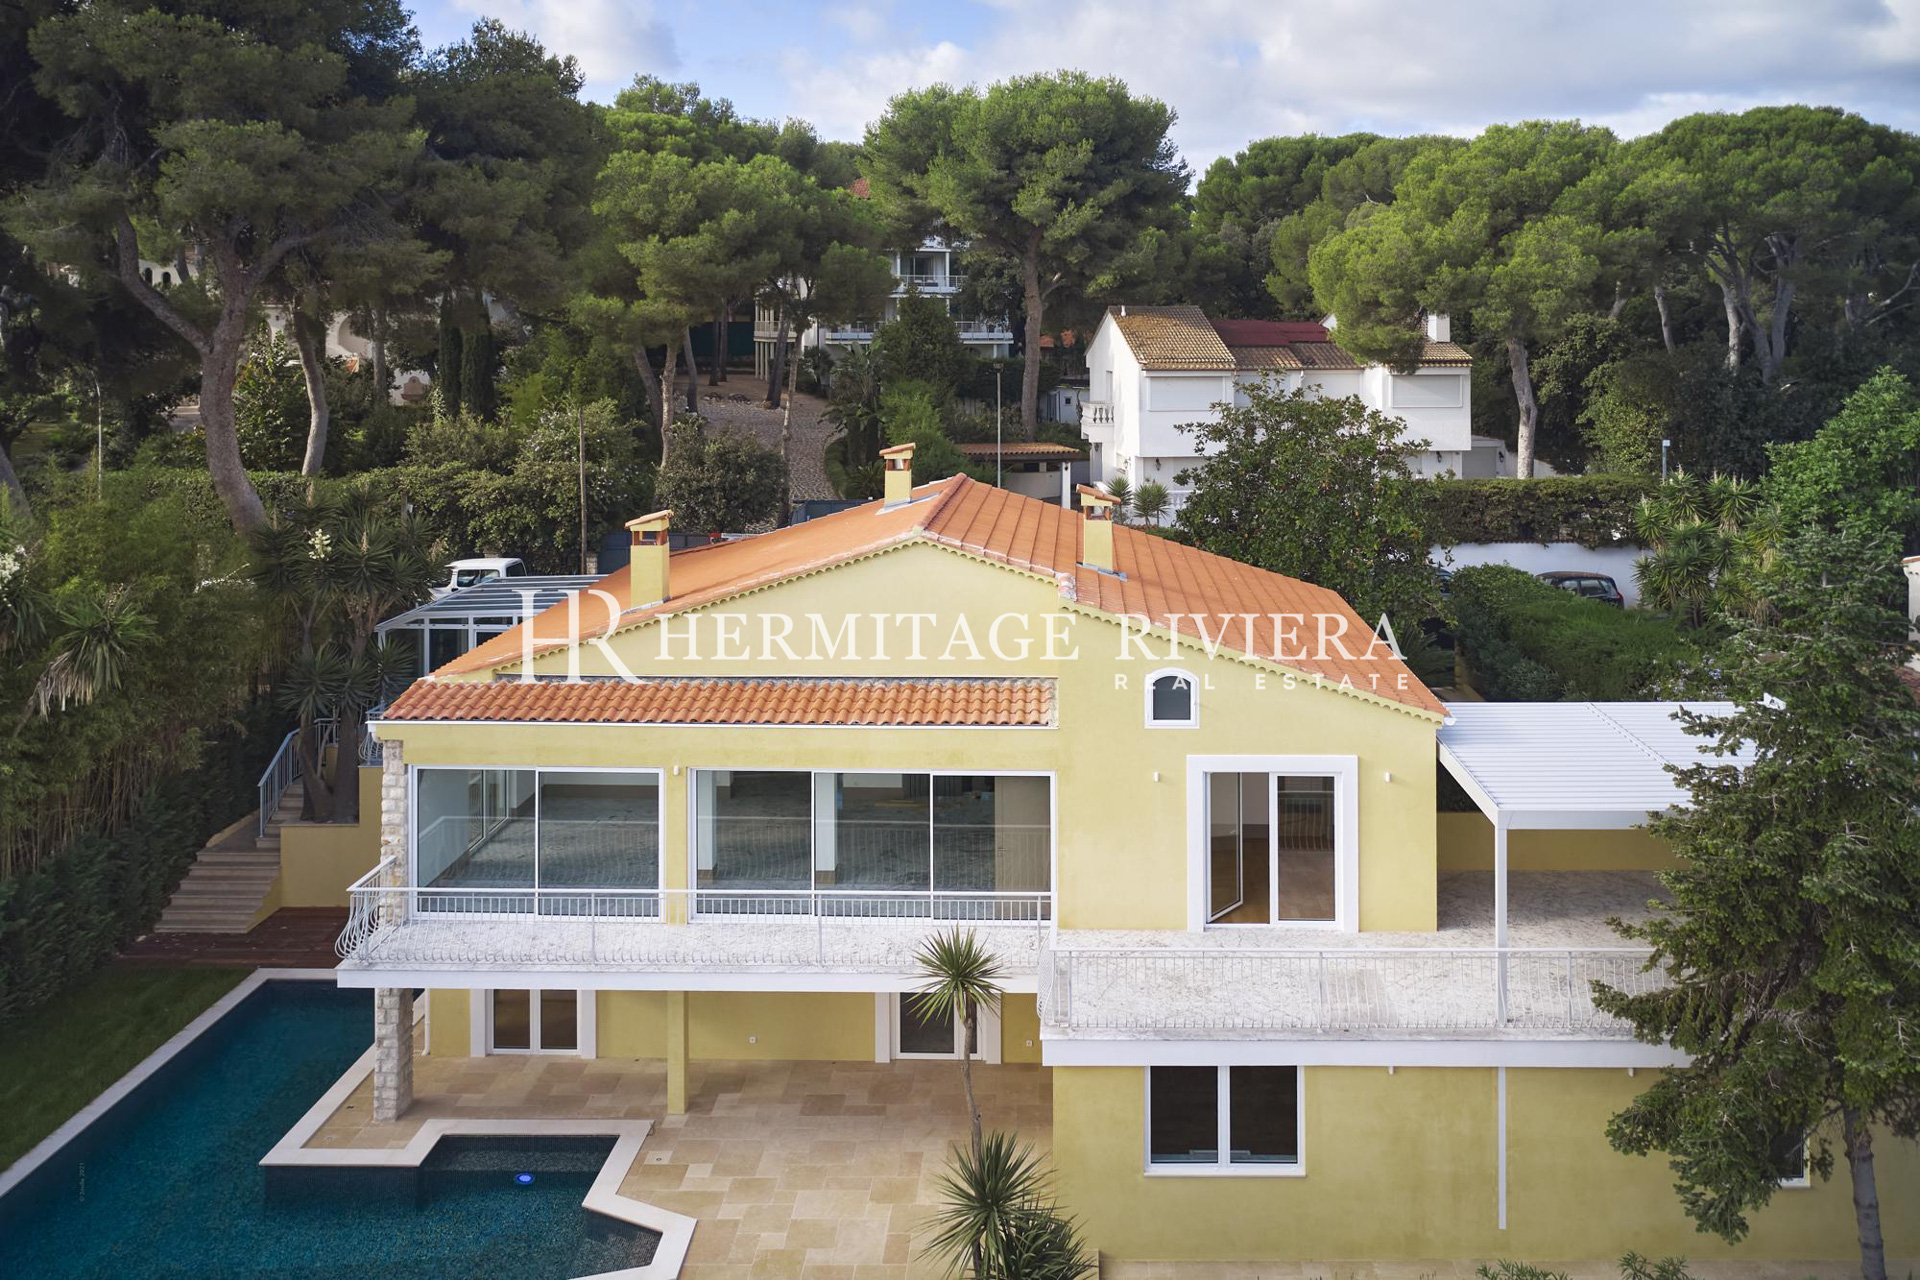 Beautifully appointed villa offering views of the sea and Italian coast (image 2)